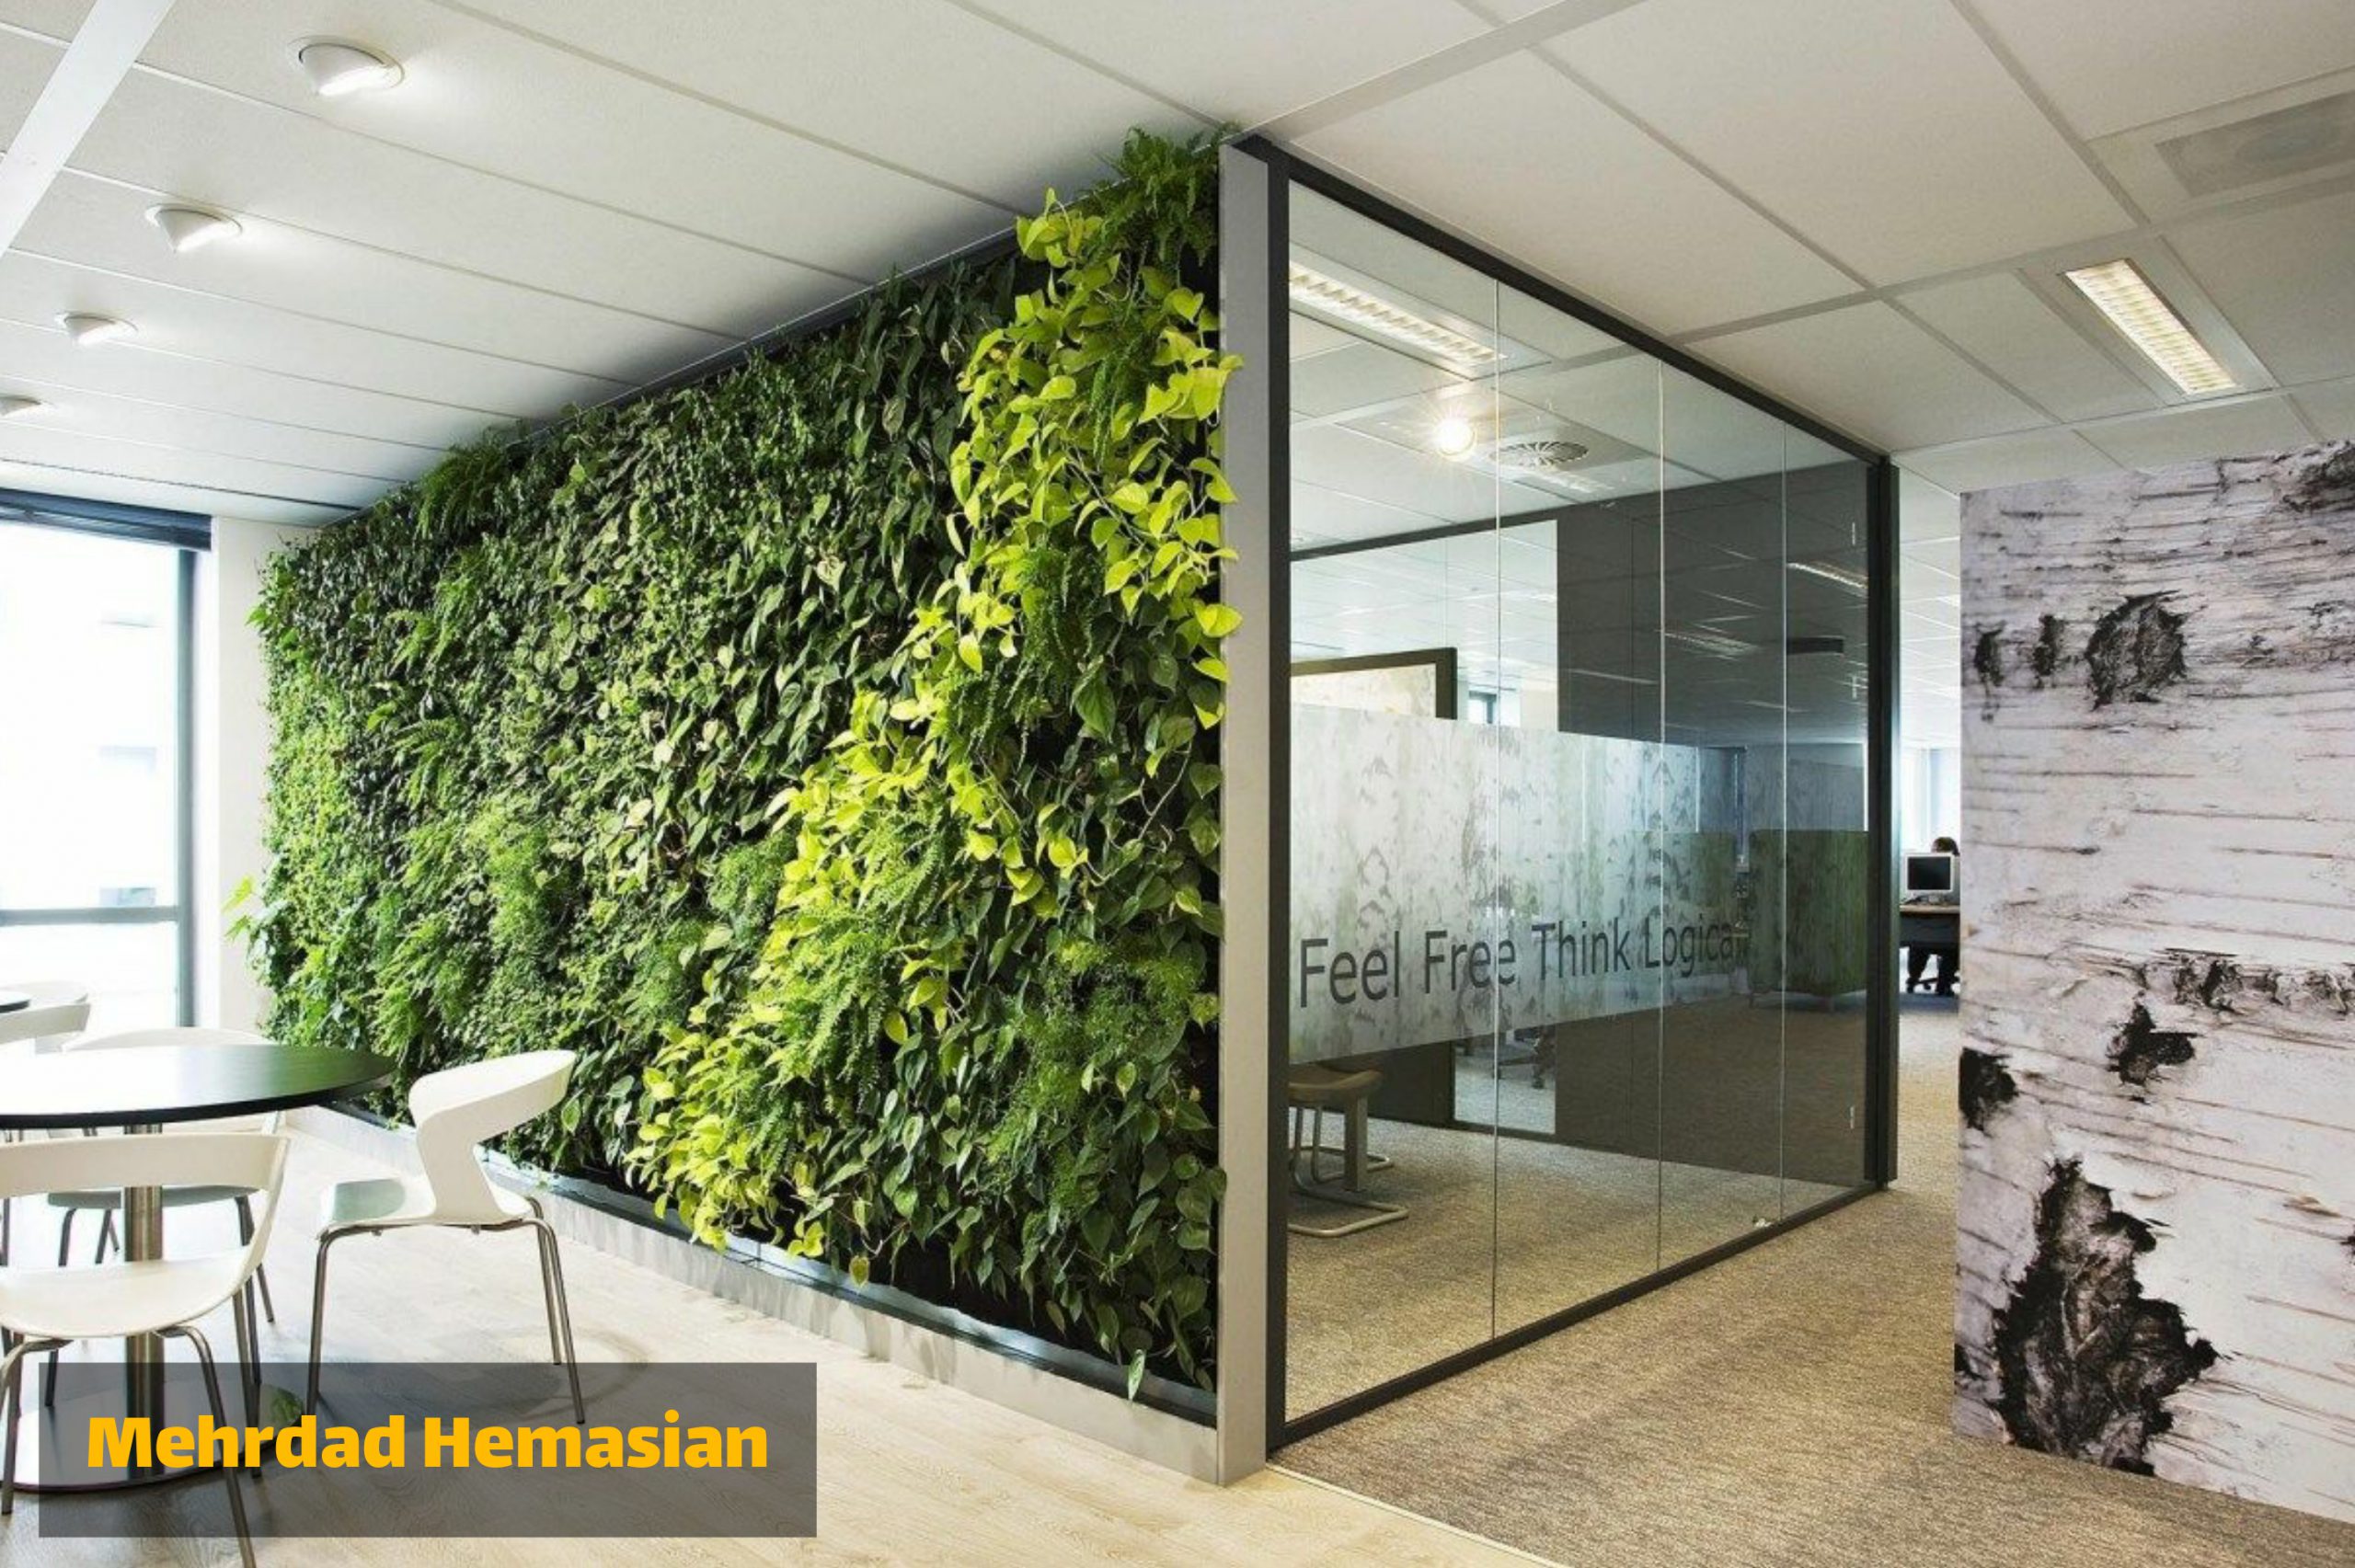 Have some greenery for the interior decoration of the office